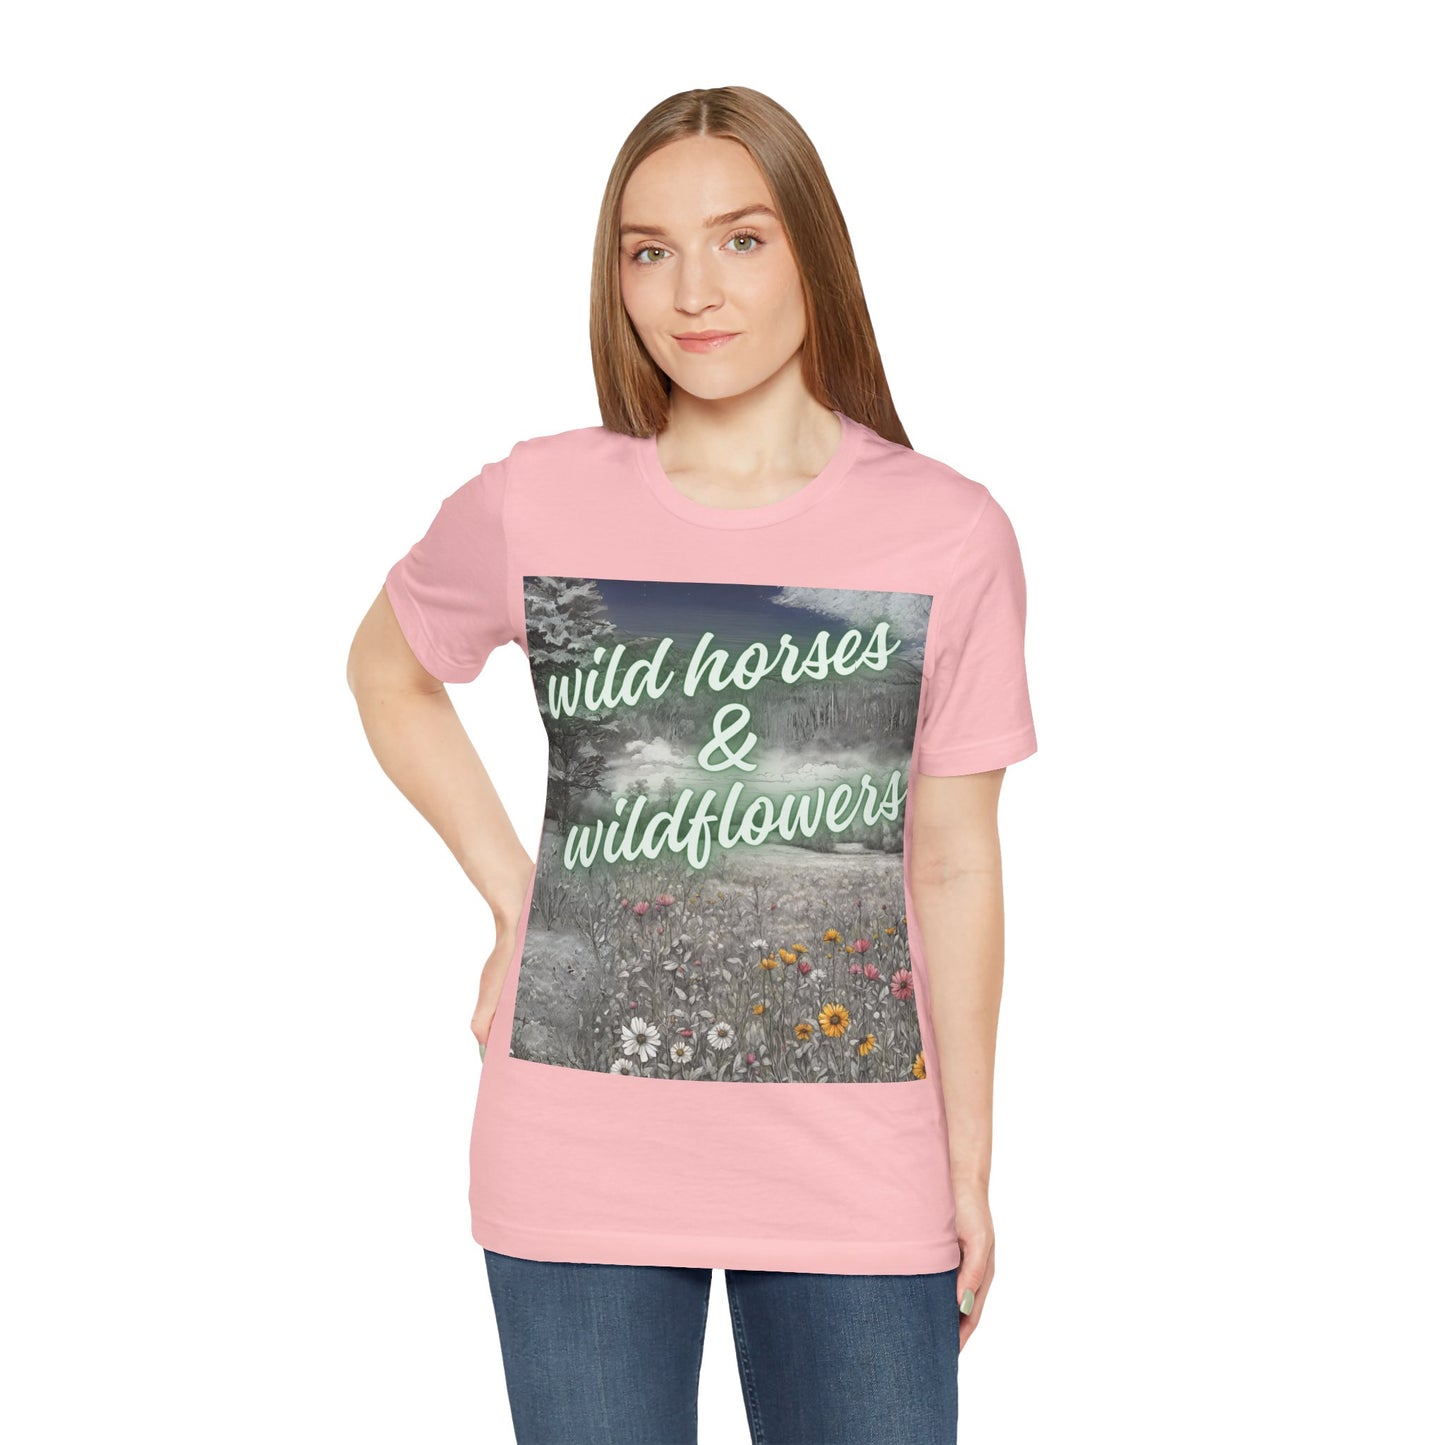 Wild Horses & Wildflowers Country Cowgirl Women's Jersey Short Sleeved Tee Size S-2xl